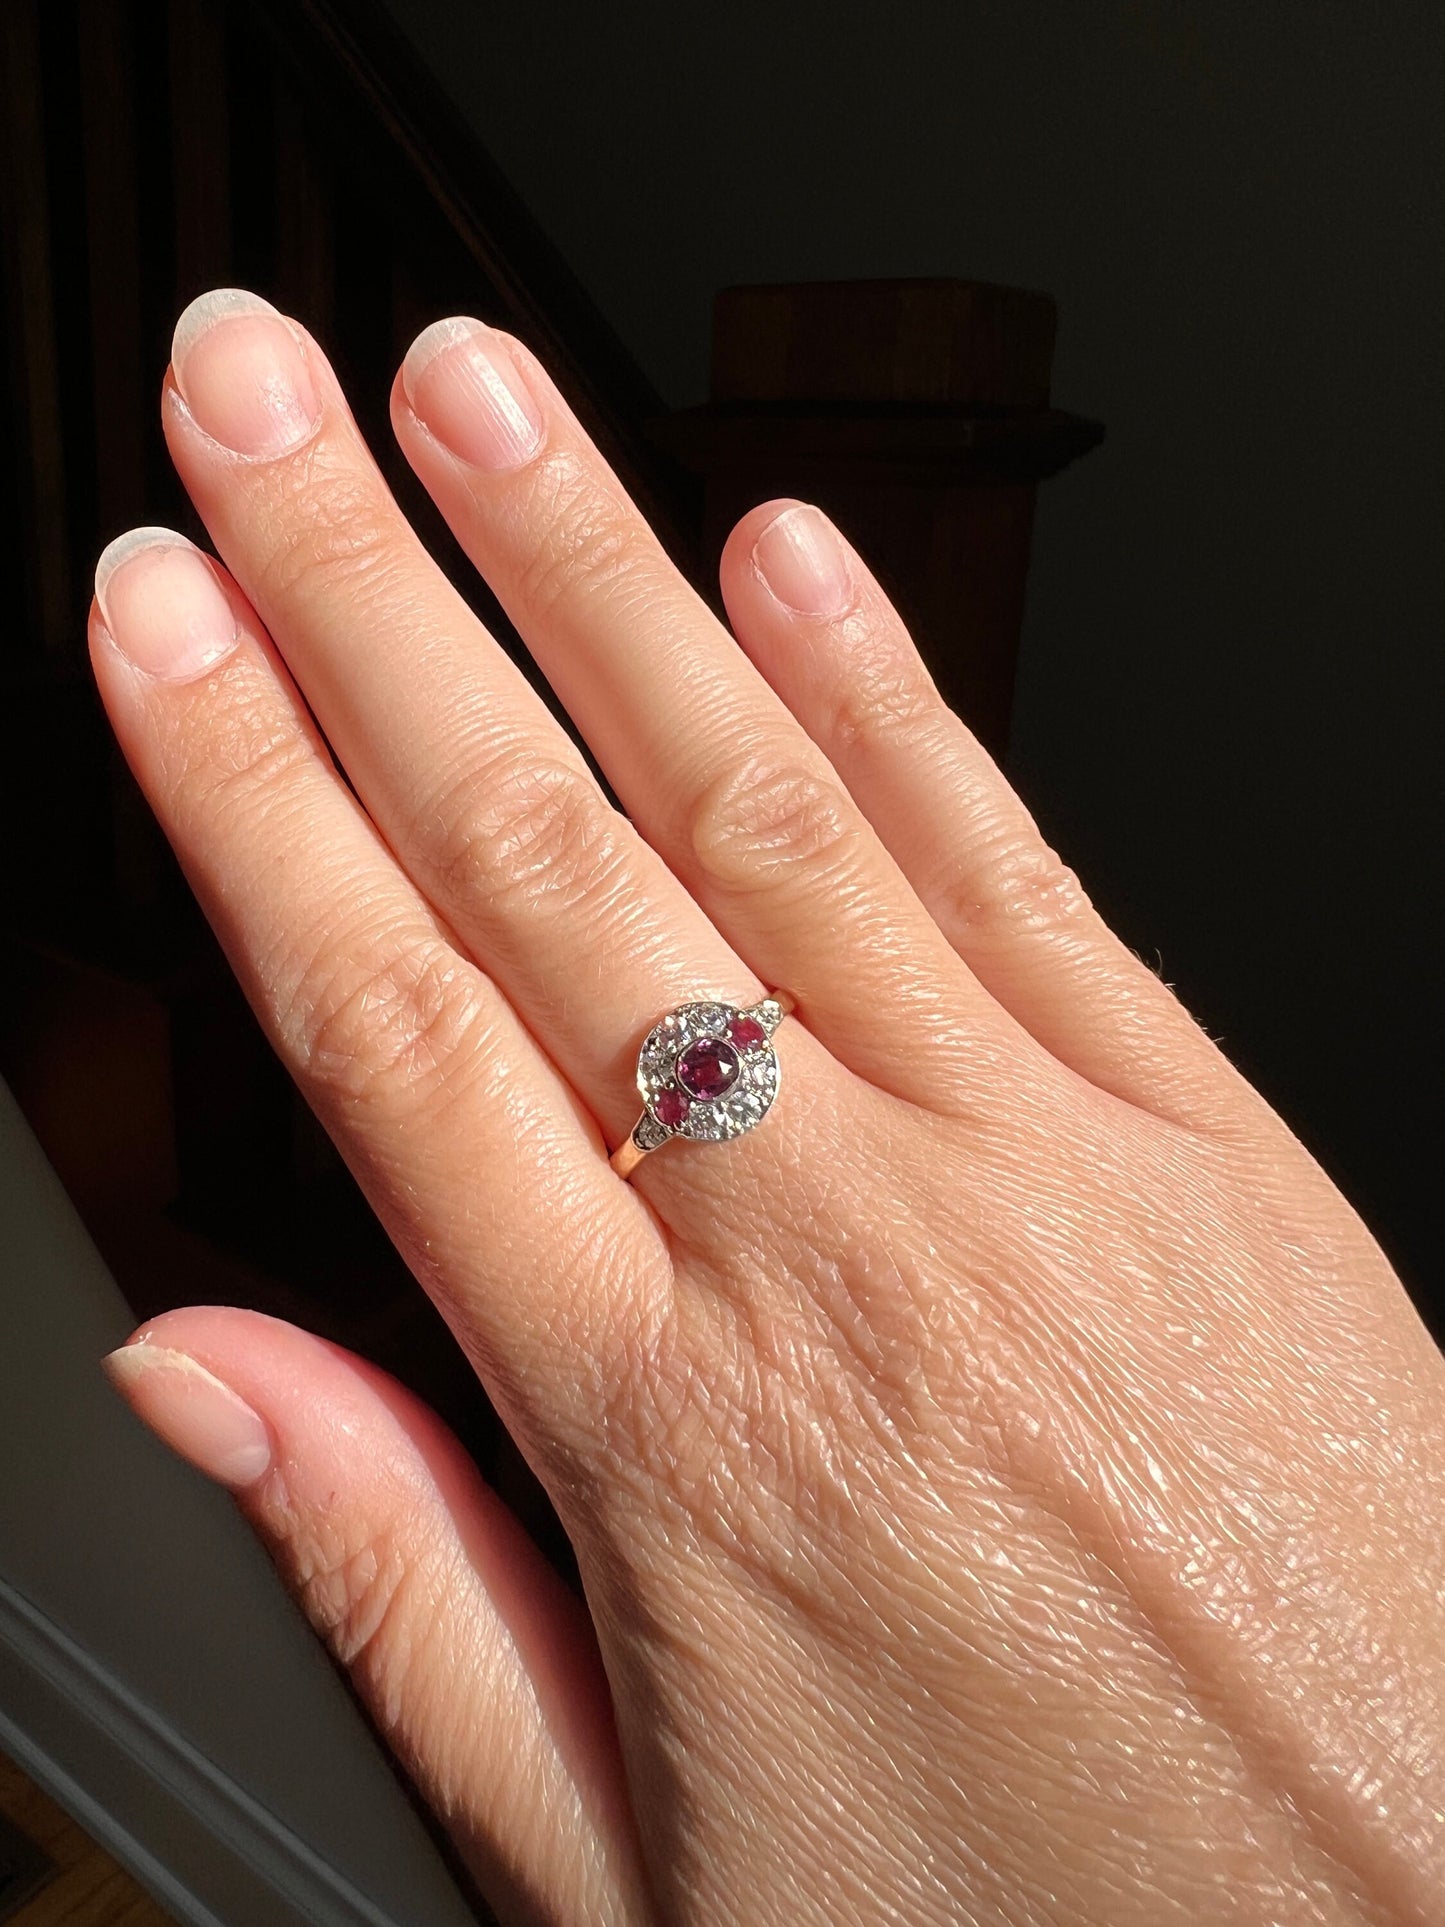 Antique RUBY Old European Cut DIAMOND Cluster Ring 18k Gold Circle Halo Stacker Linear Geometric Romantic Gift Red Mauve Pink Purple Sparkle